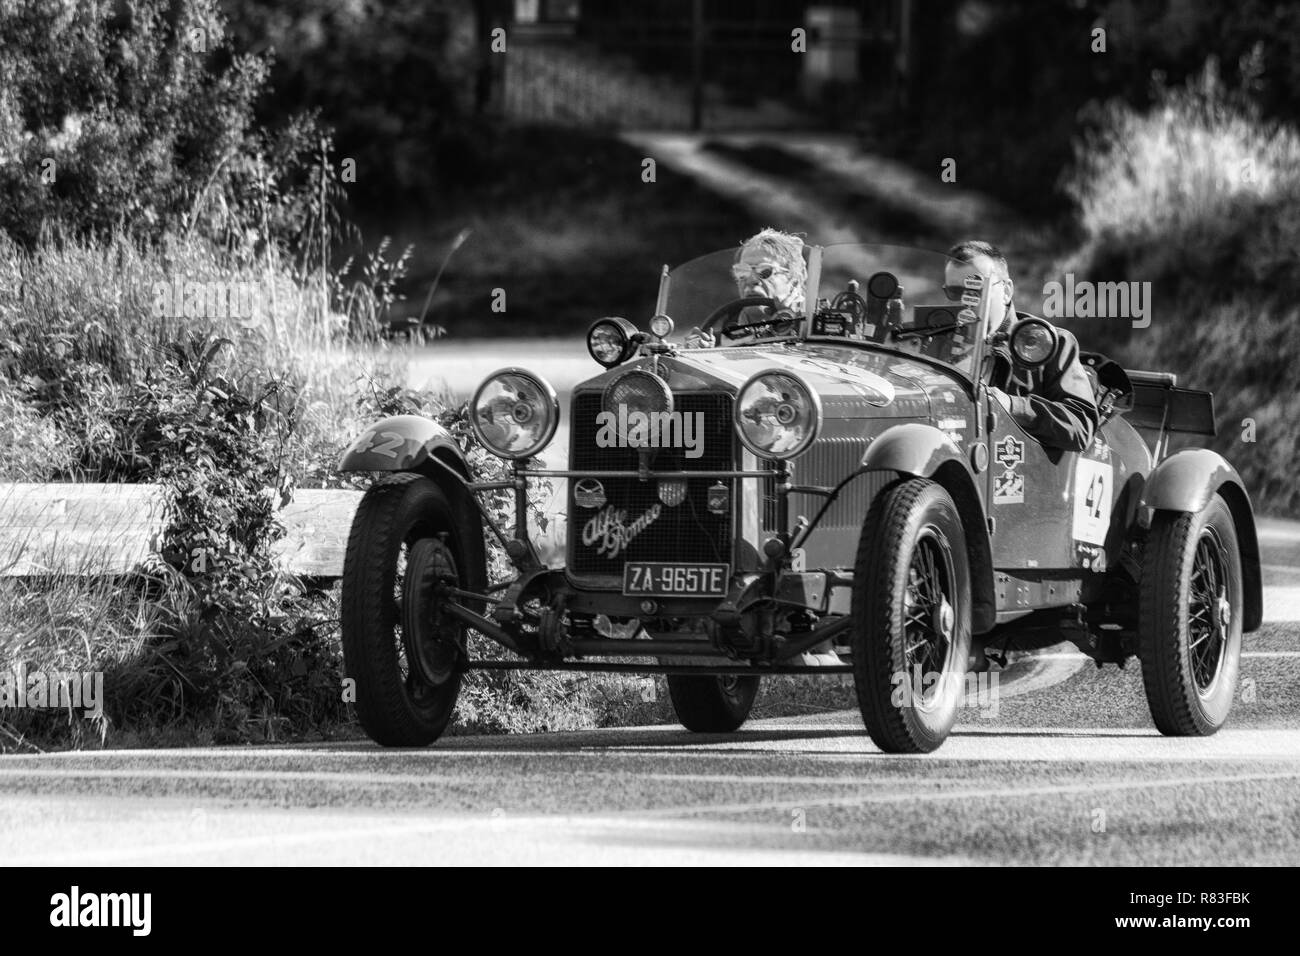 PESARO COLLE SAN BARTOLO , ITALY - MAY 17 - 2018 : ALFA ROMEO 6C 1500 SUPER SPORT MM 1928 on an old racing car in rally Mille Miglia 2018 the famous i Stock Photo